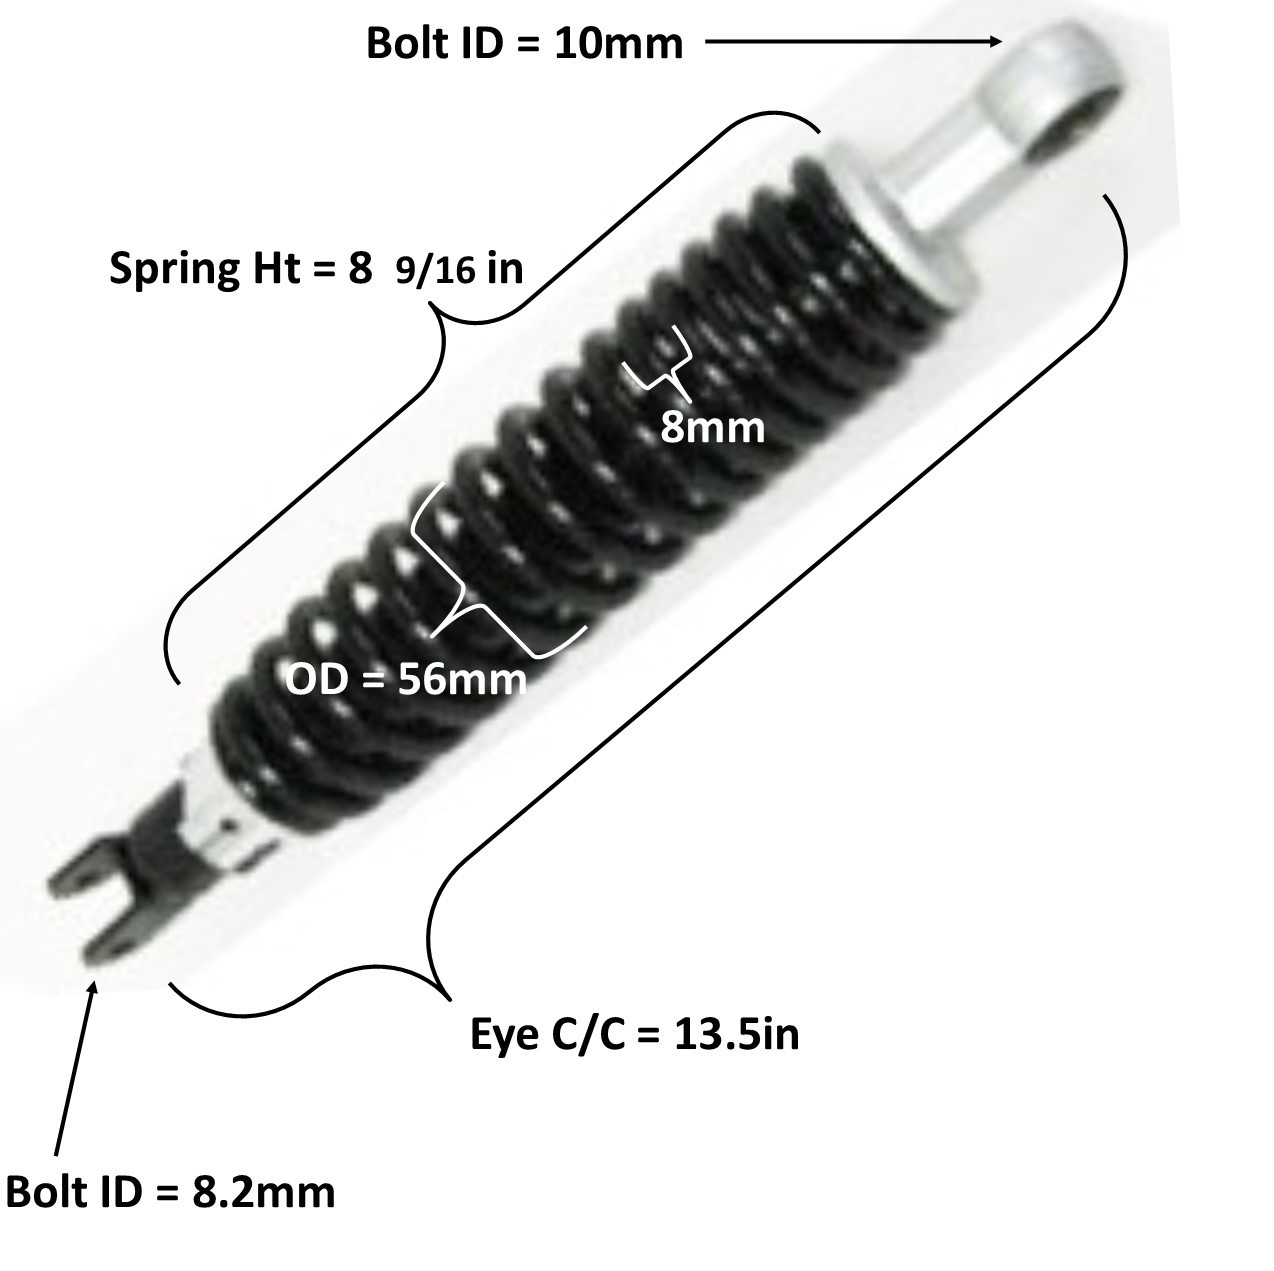 Rear Shock Eye c/c=13 1/2in Spring Ht=8 9/16in Spring OD=56mm Spring Thickness=8mm Fits E-Ton Sport 50, Tomos Nitro 50, 49cc Scooters Bolt ID Top=10 Bottom= 8.2mm